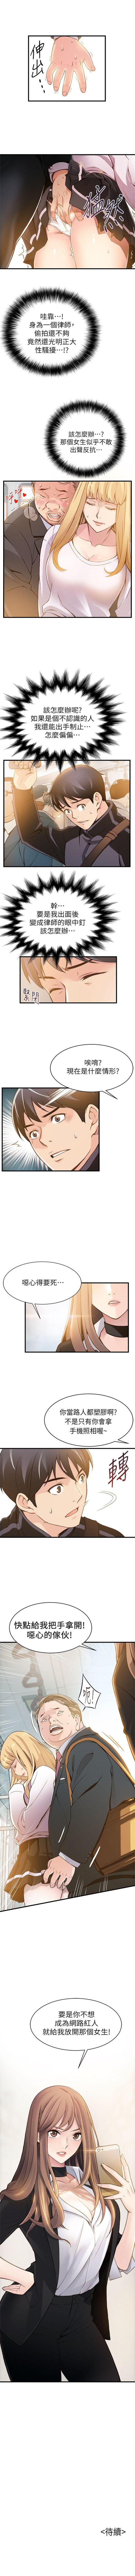 Teasing 弱點 1-89 官方中文（連載中） Abuse - Page 8